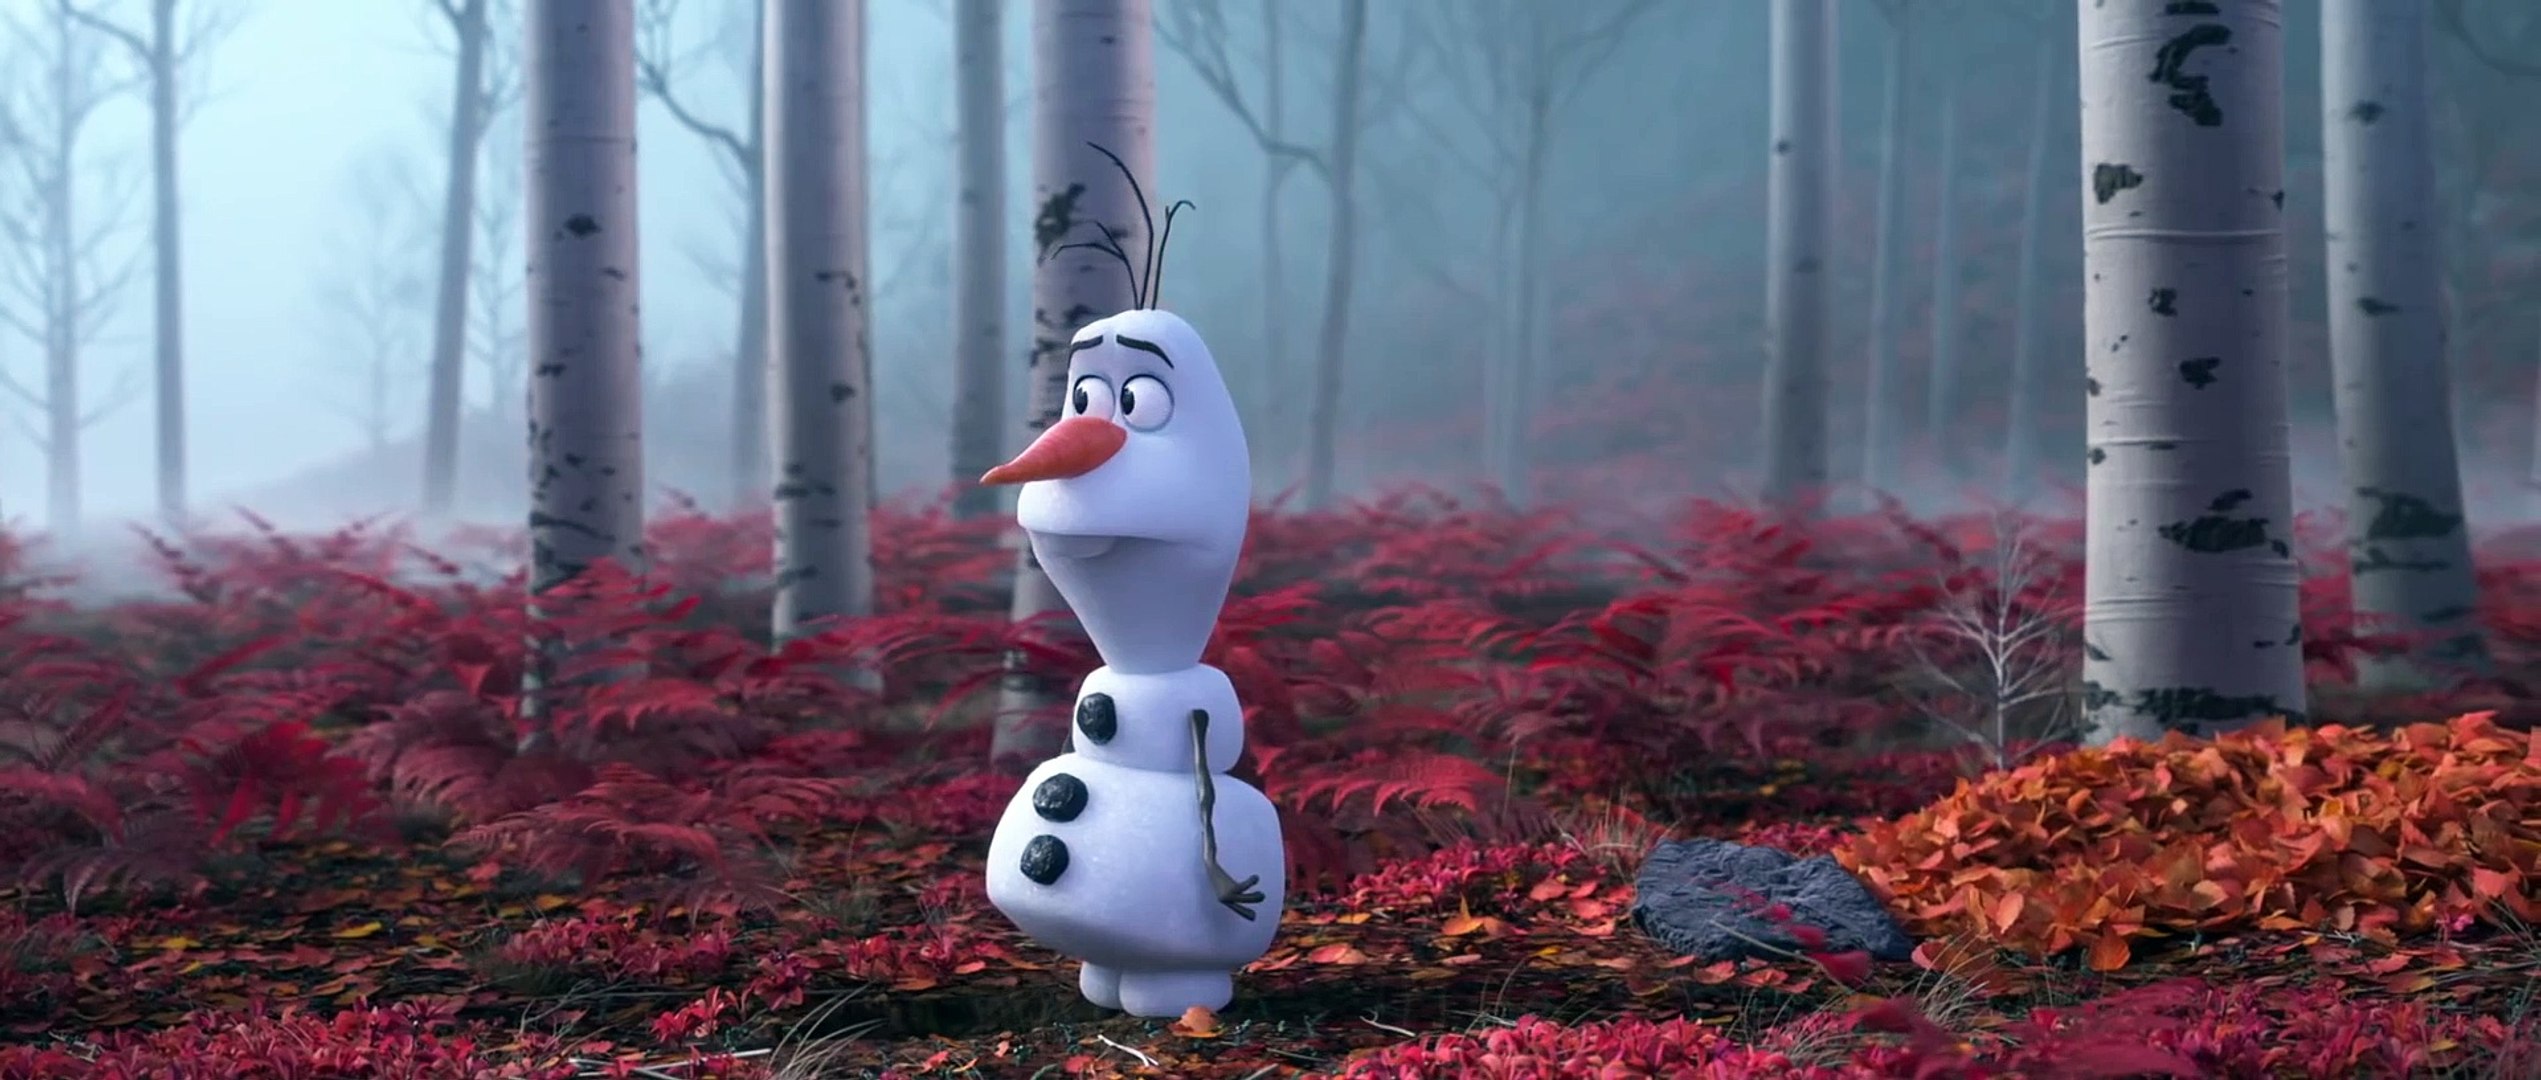 How Disney's animation evolved from 'Frozen' to 'Frozen 2' - video  Dailymotion